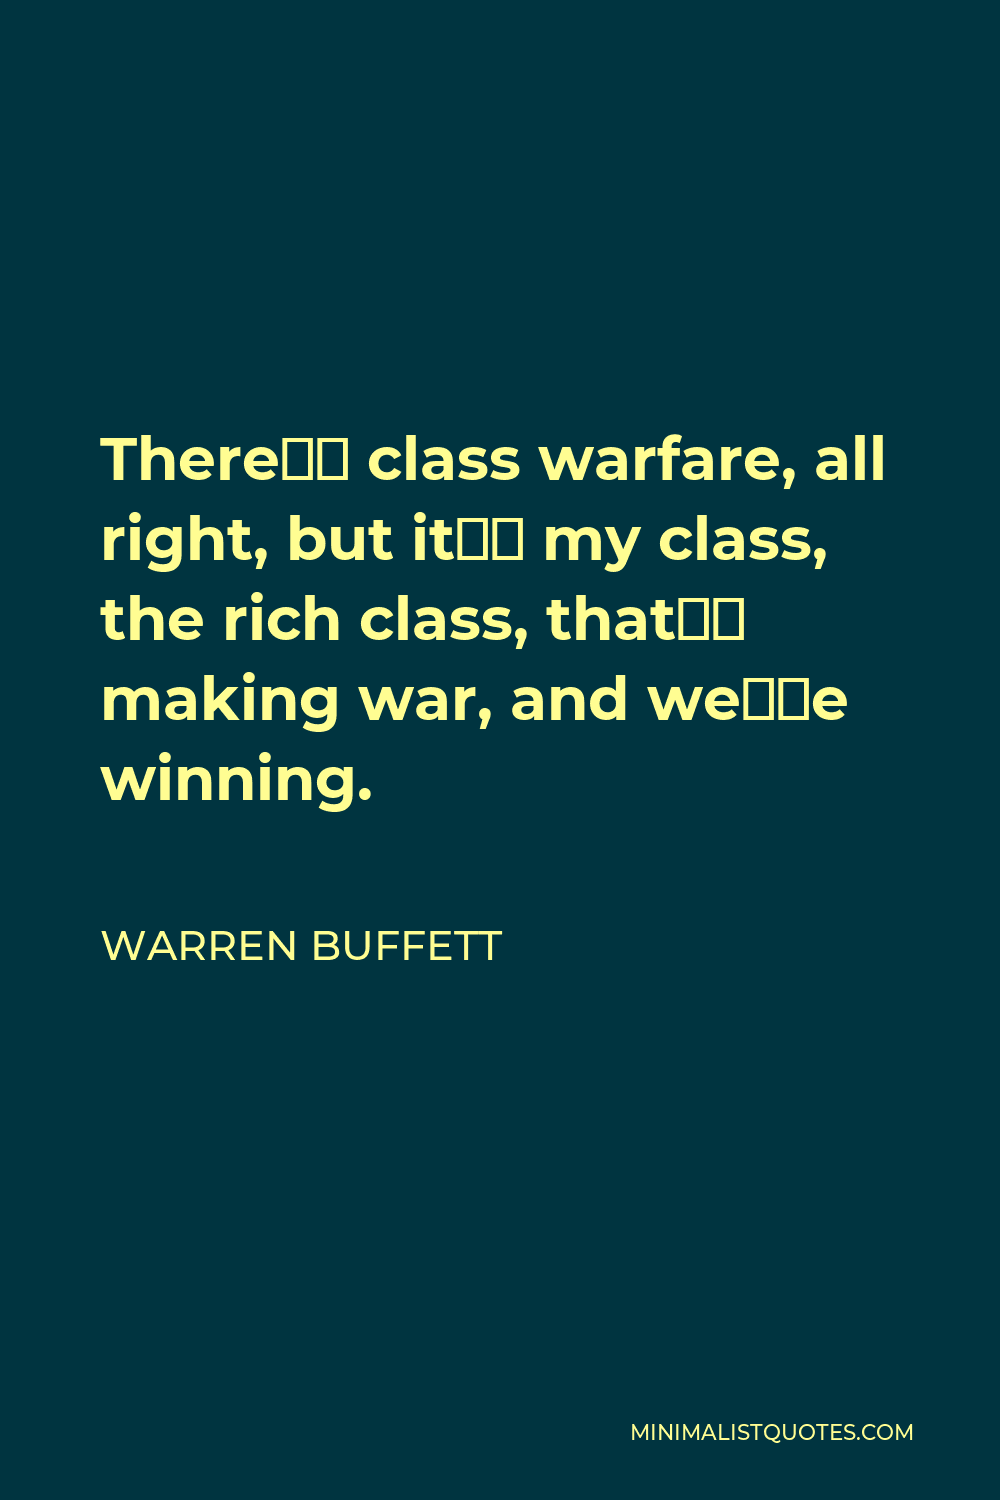 Warren Buffett Quote - There’s class warfare, all right, but it’s my class, the rich class, that’s making war, and we’re winning.